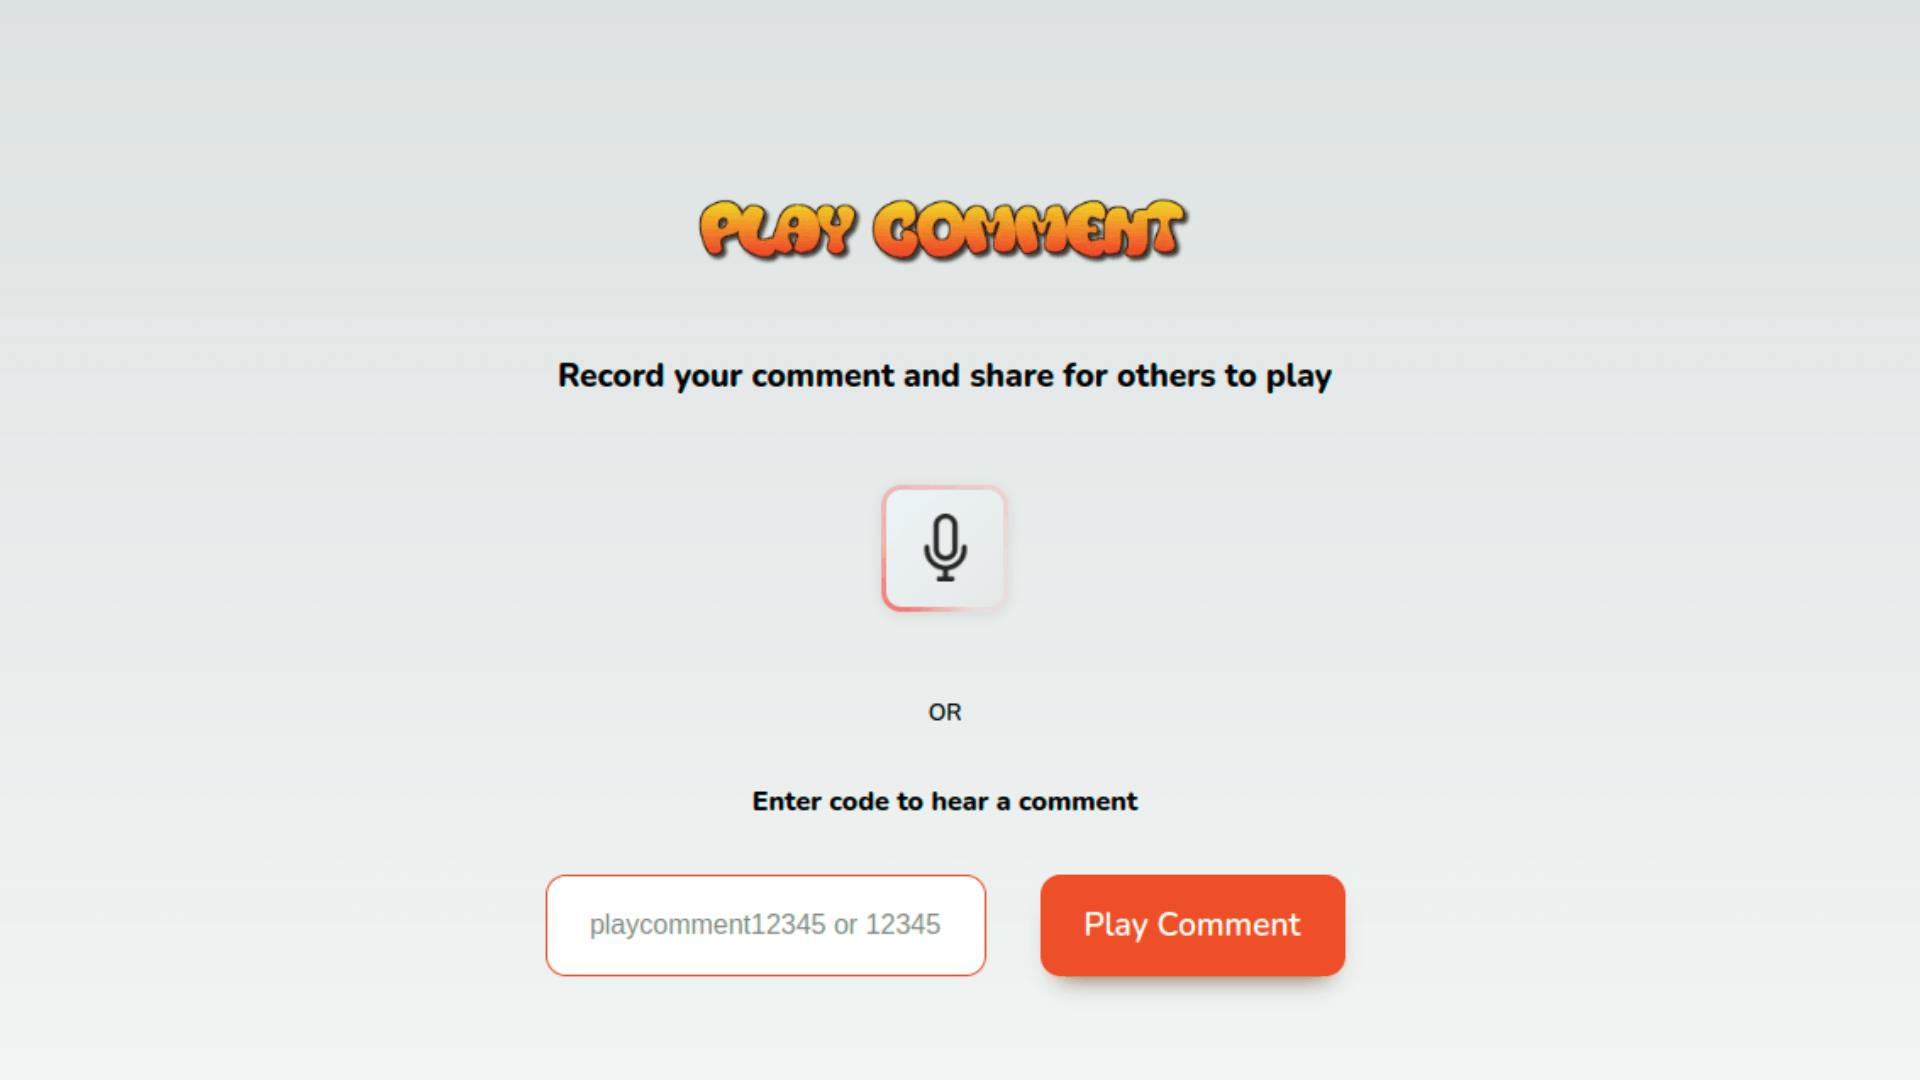 Play Comment